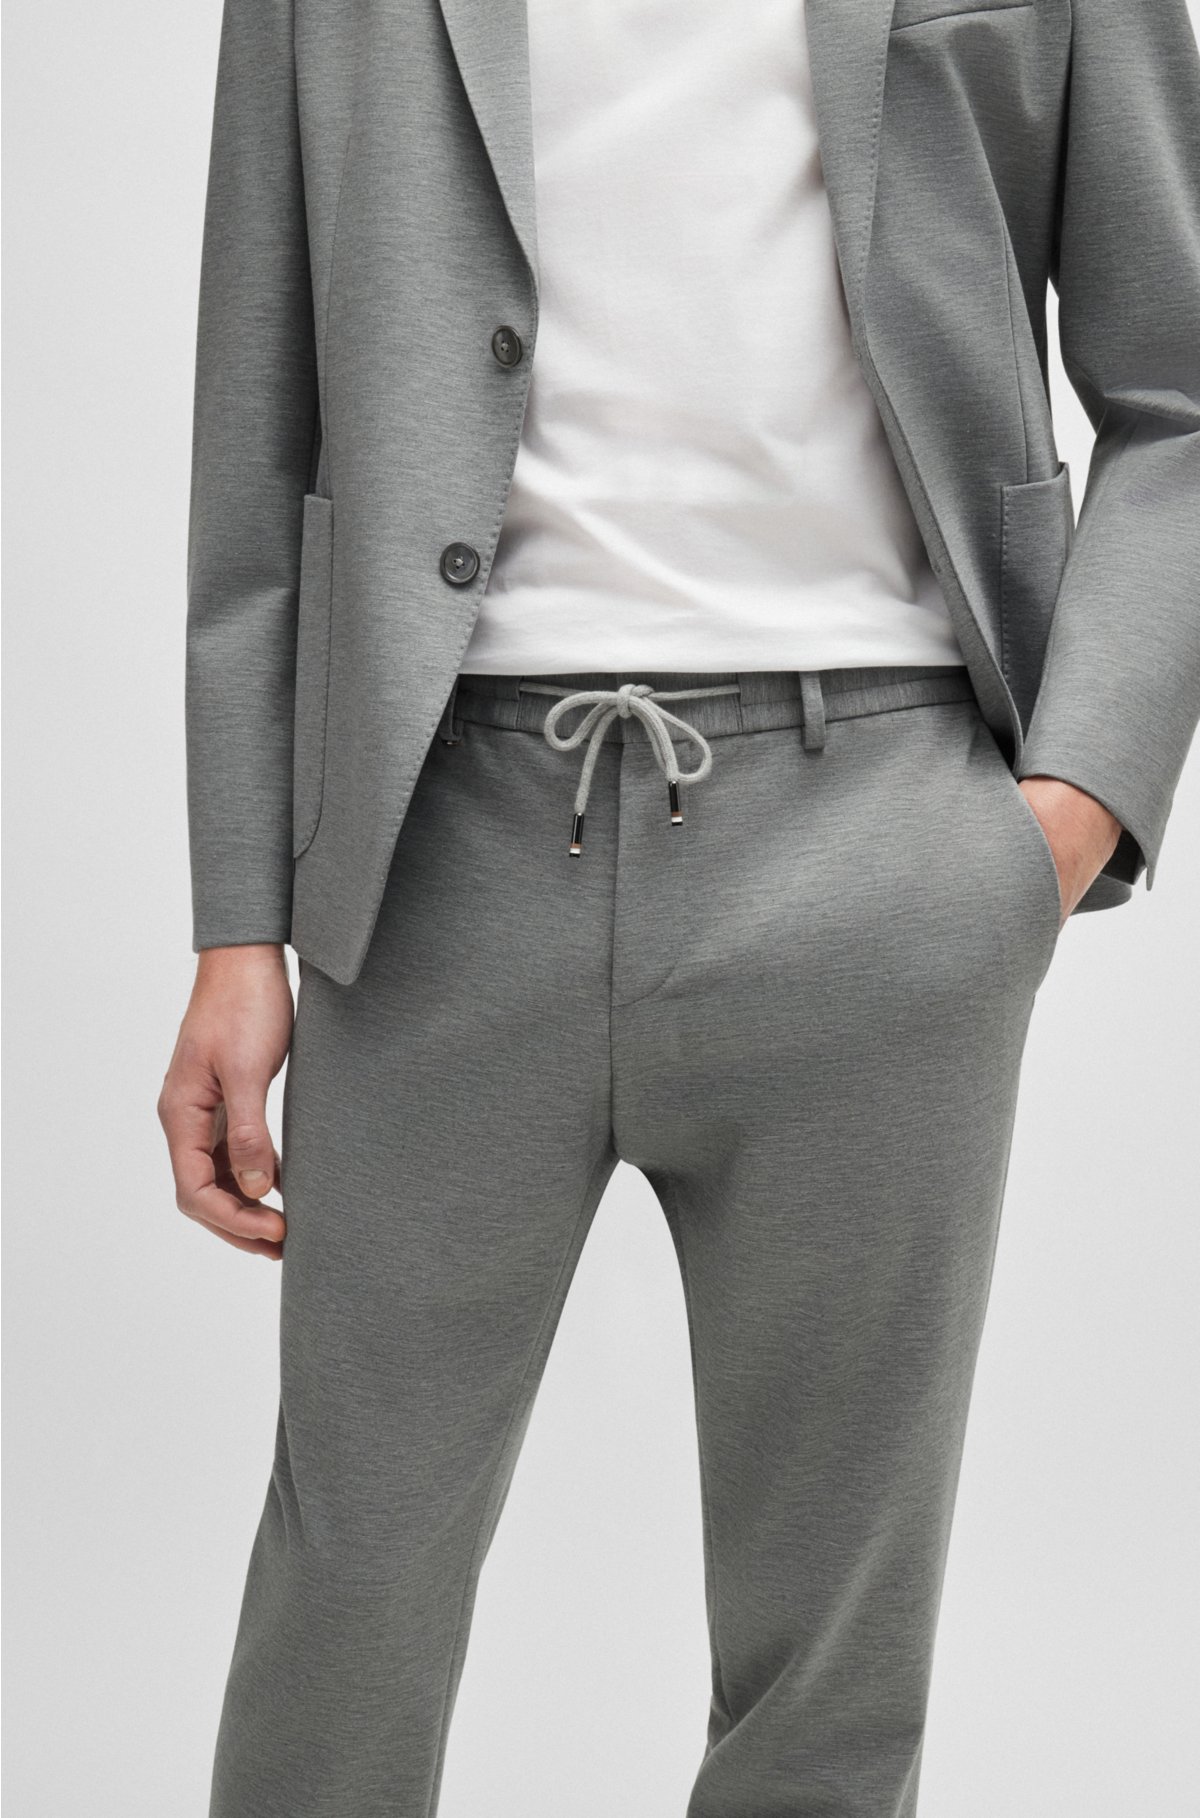 Slim-fit trousers in melange stretch jersey, Silver